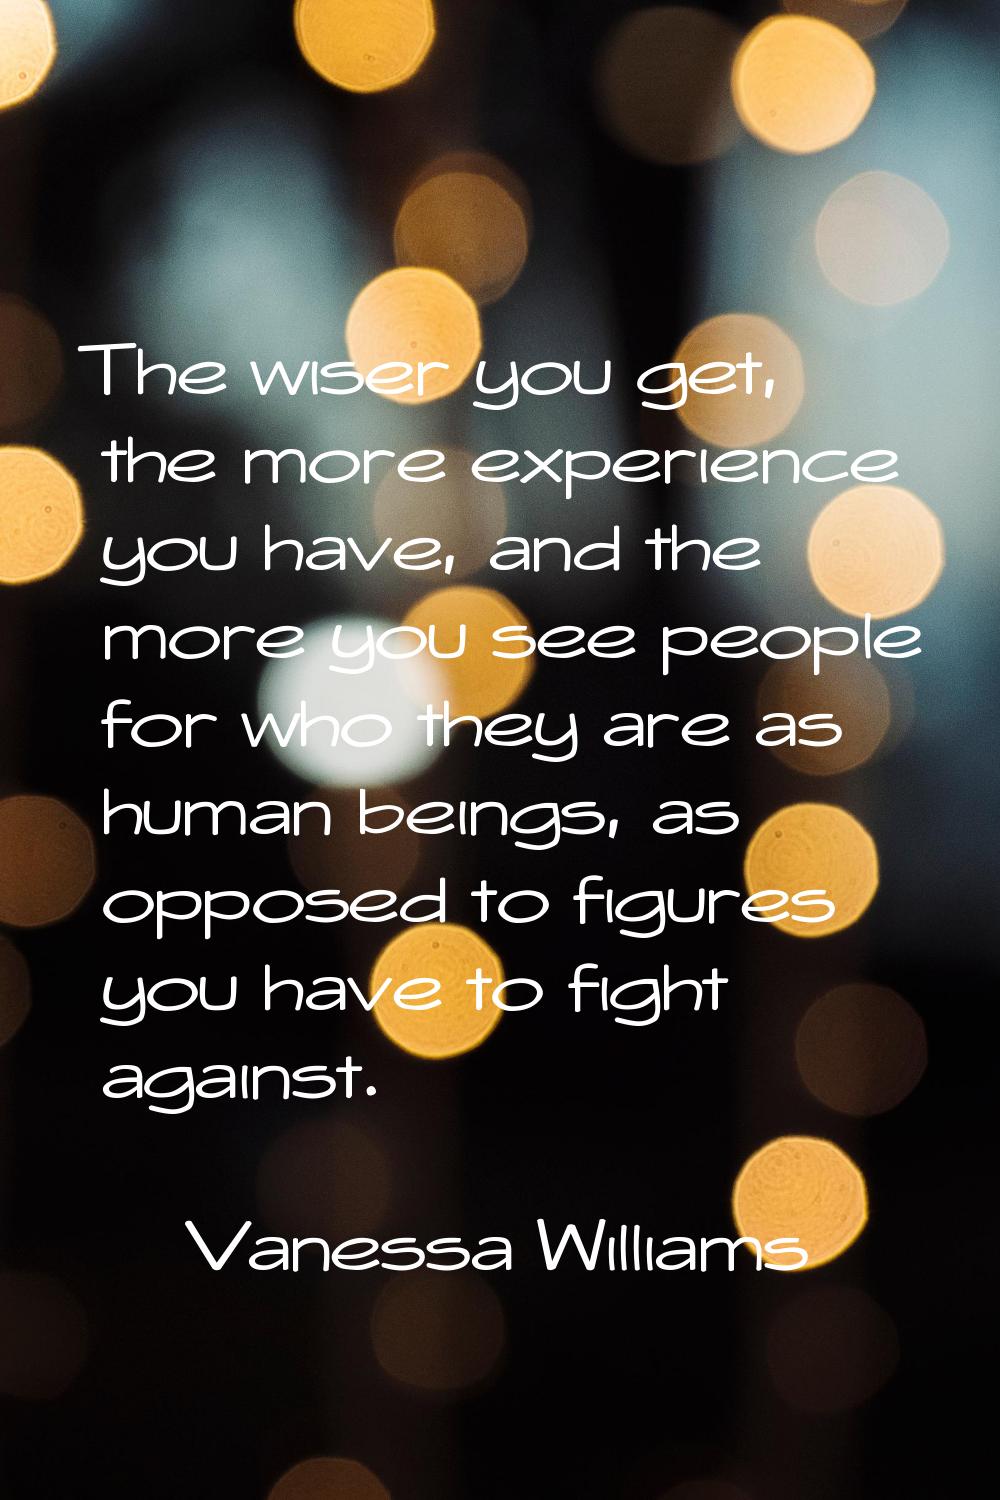 The wiser you get, the more experience you have, and the more you see people for who they are as hu